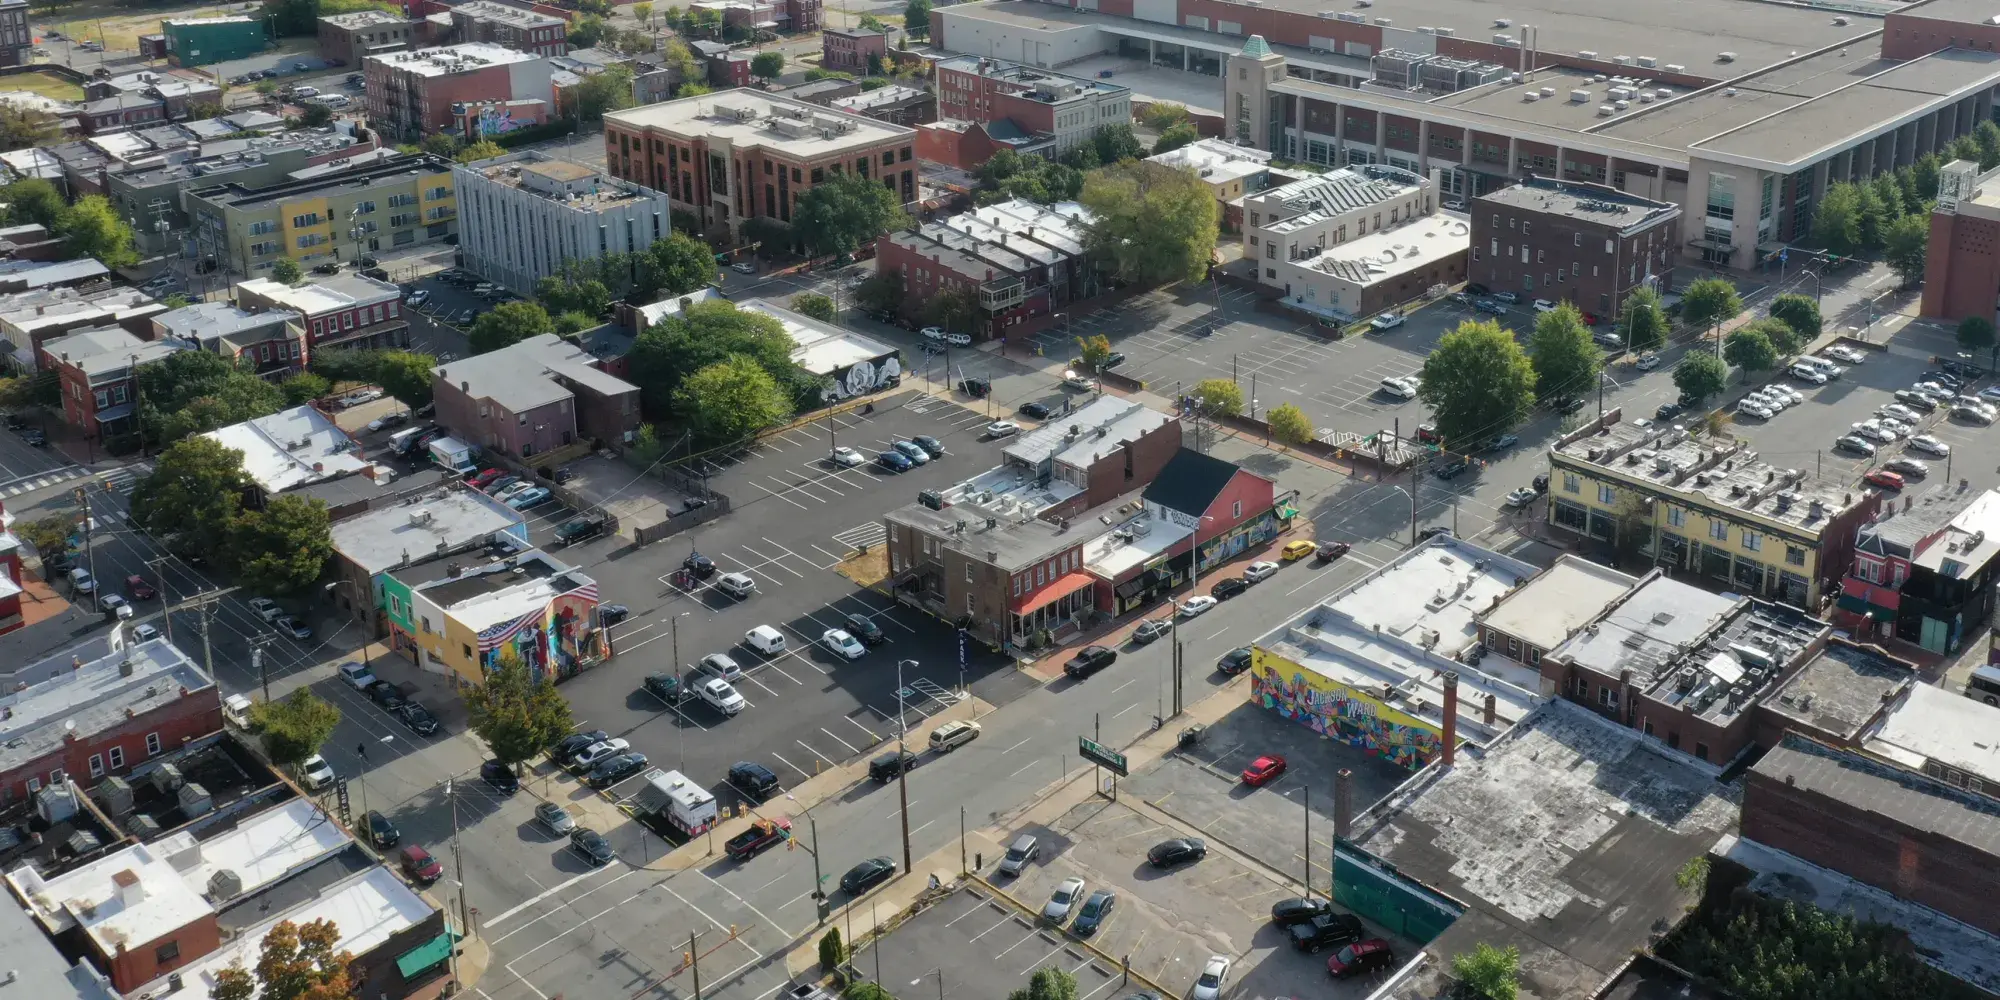 100 & 106 E Marshall street in Aerial View